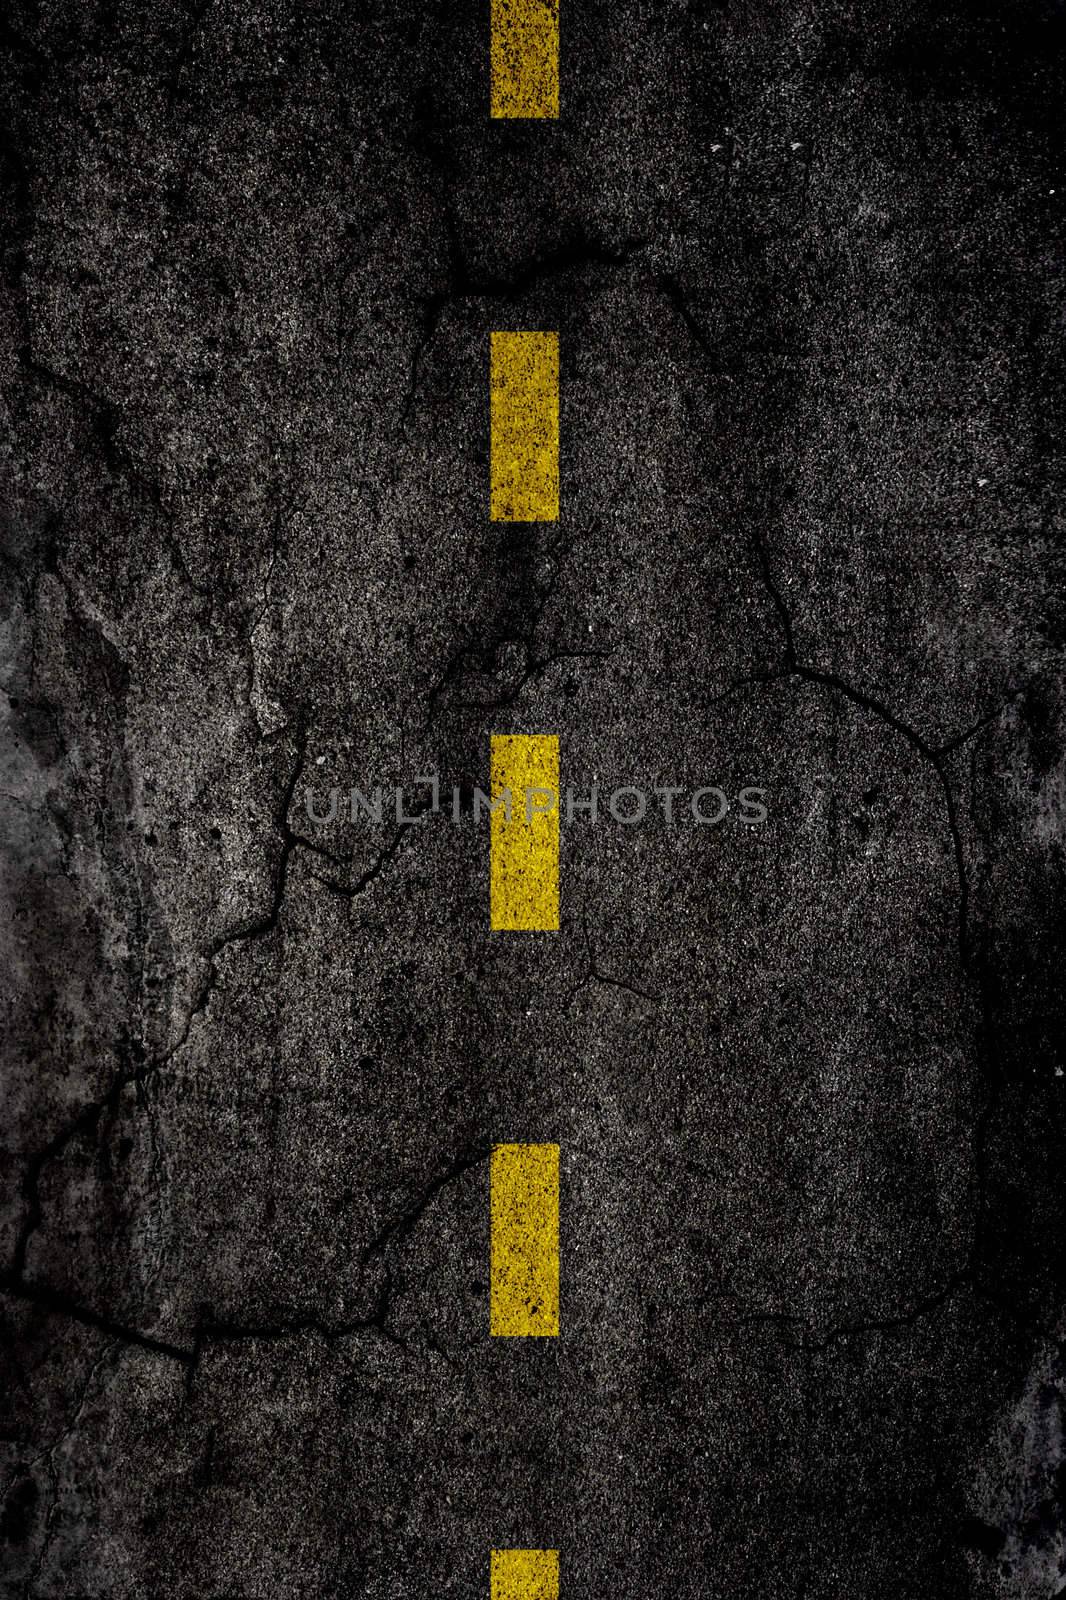 
Asphalt background texture with a divided yellow line